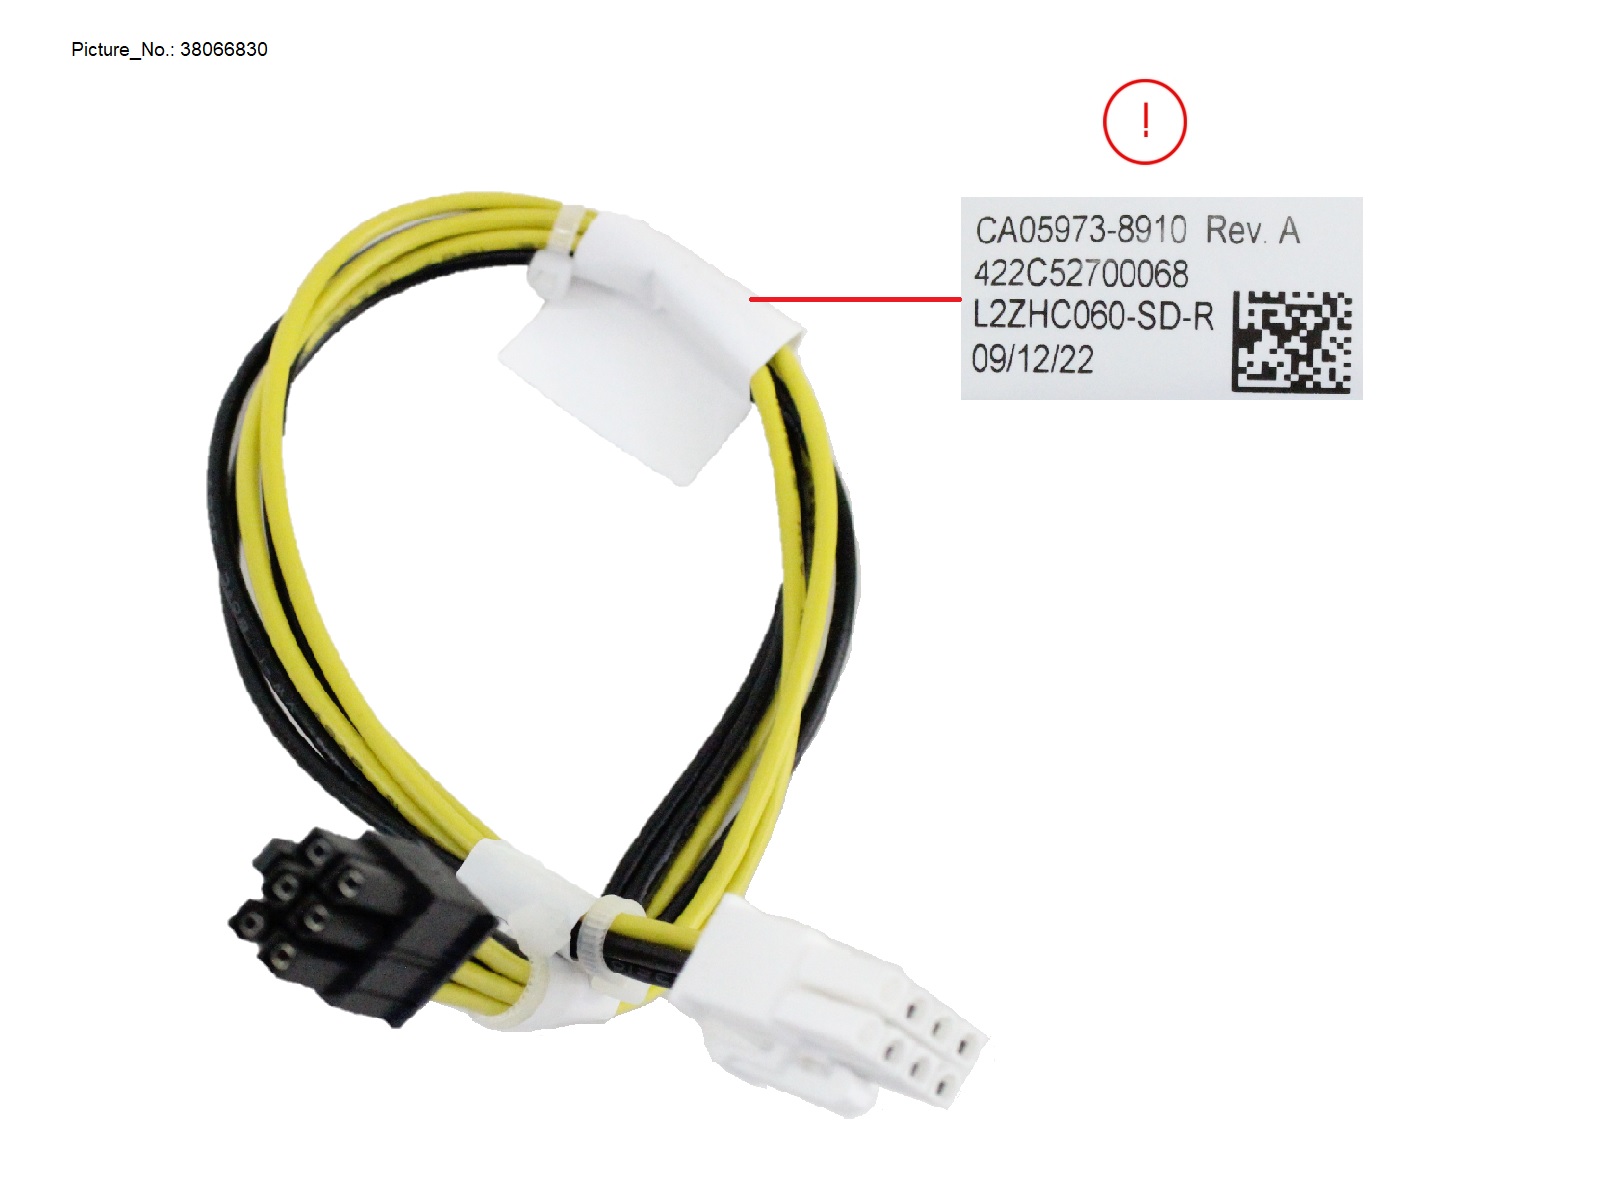 POWER CABLE (NVIDIA CARD TO MB)